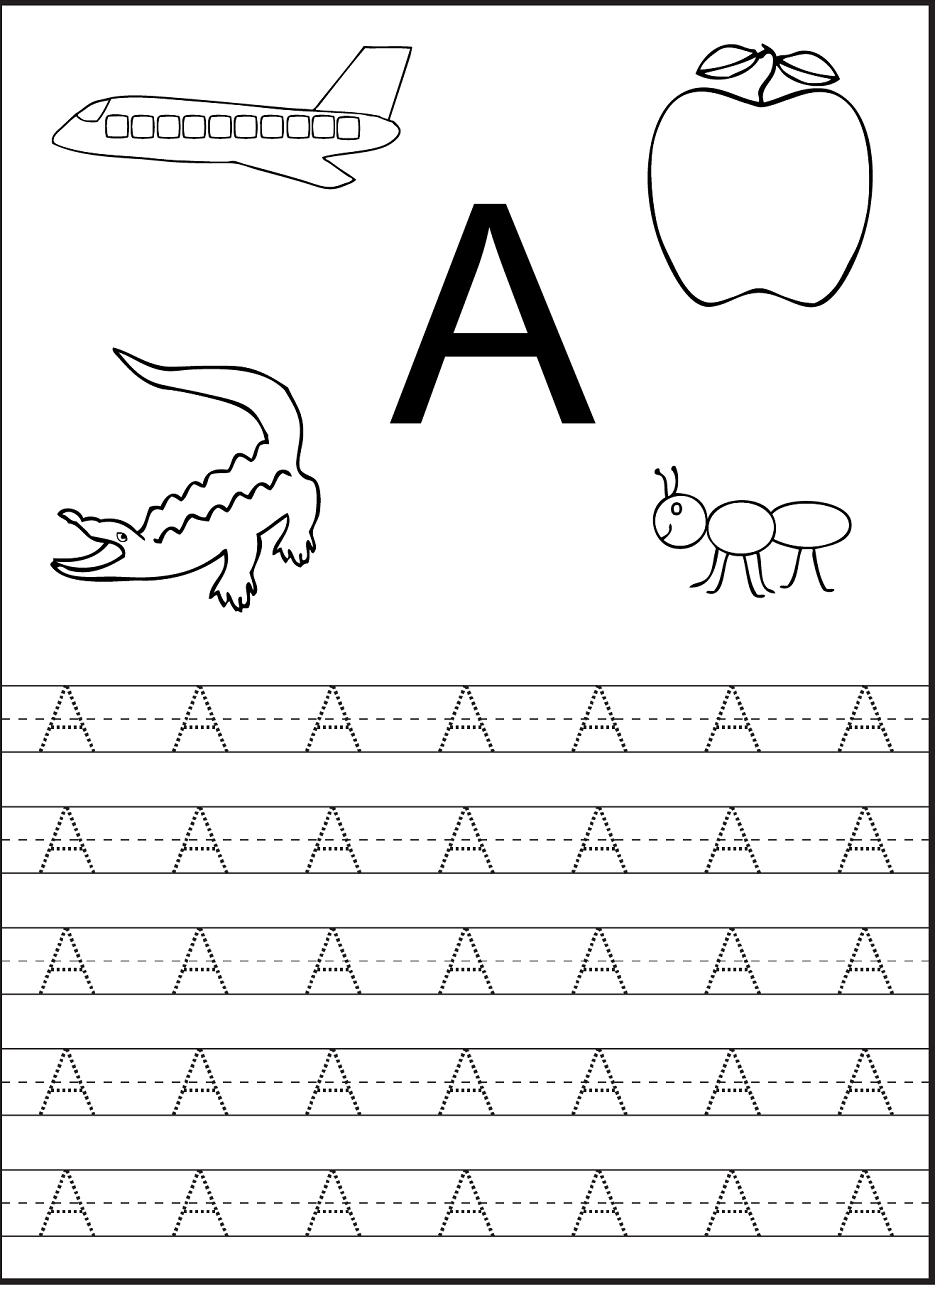 Tracing The Letter A Free Printable | Preschool Worksheets in Preschool Tracing Letters Worksheets Free